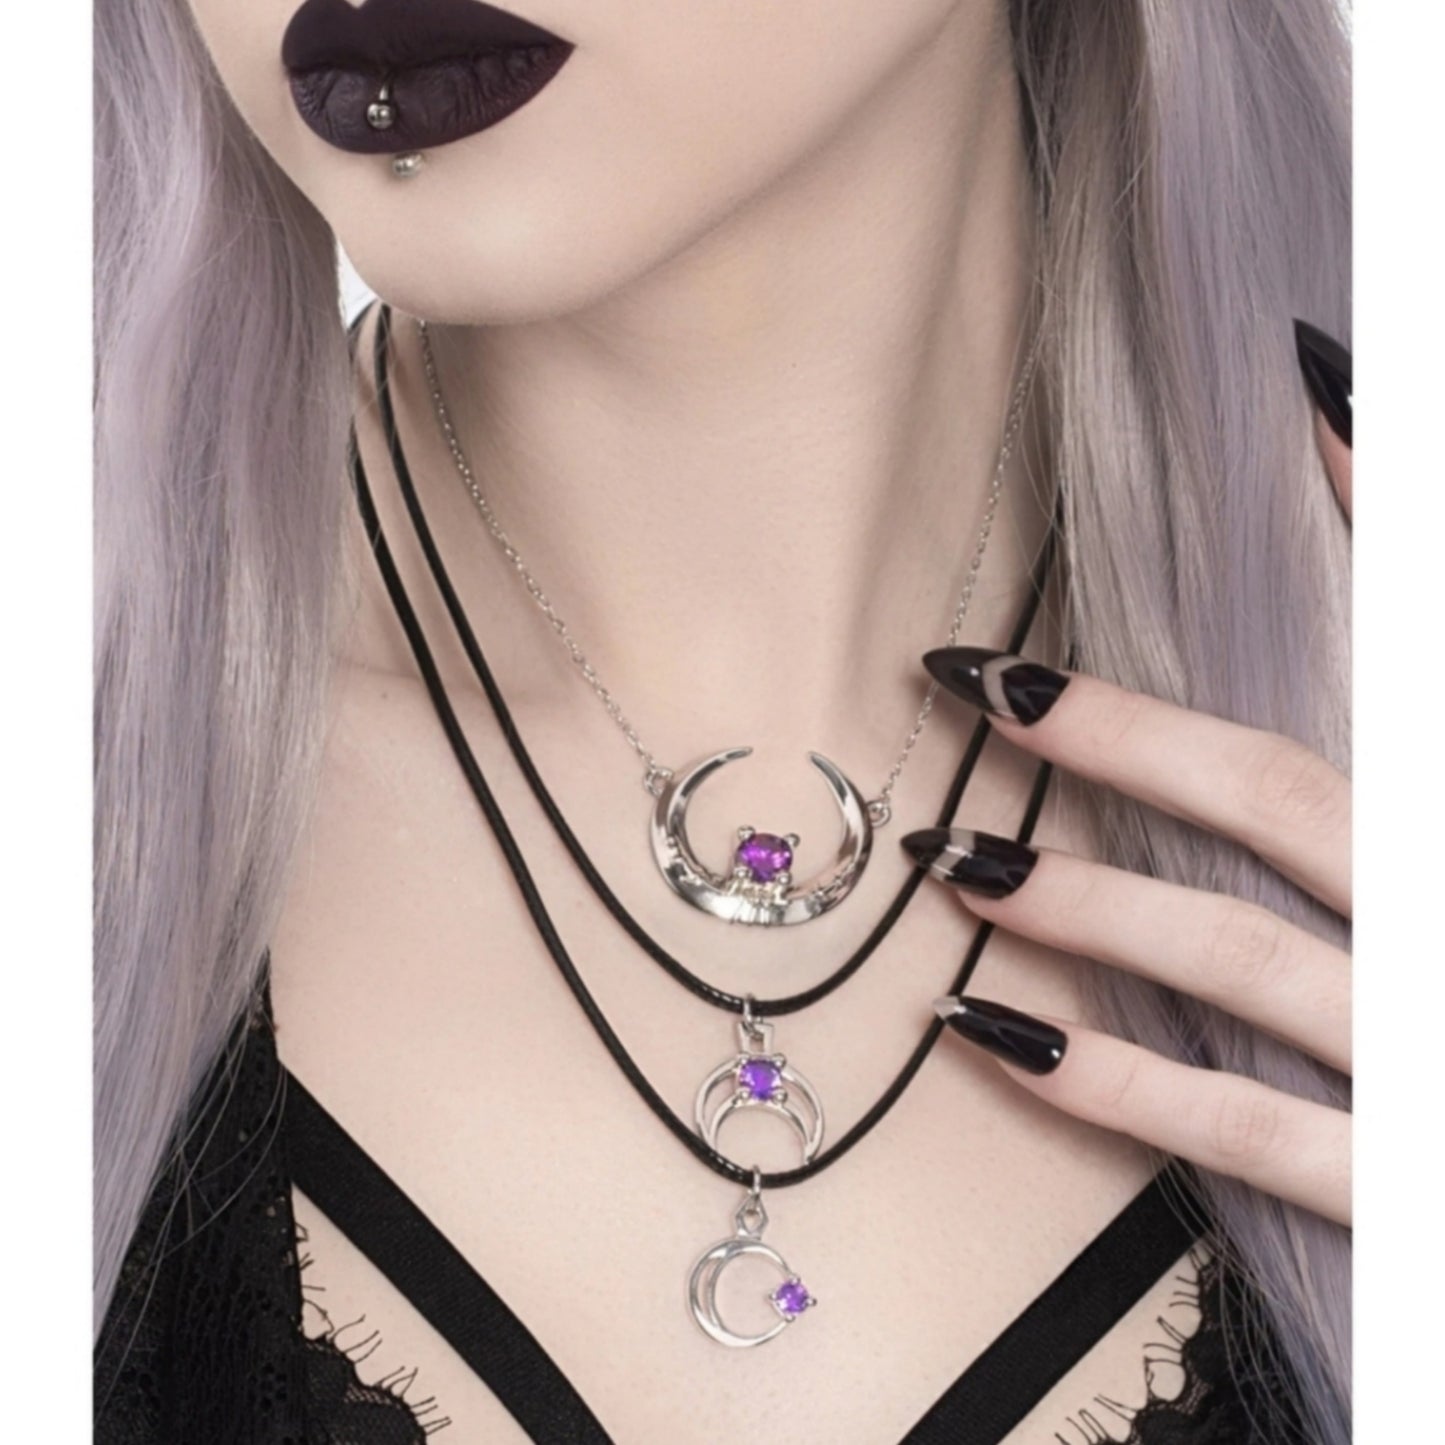 Mirror Stainless Steel Necklace | Eclipse 925 Amethyst Pendant - Rogue + Wolf - Necklaces